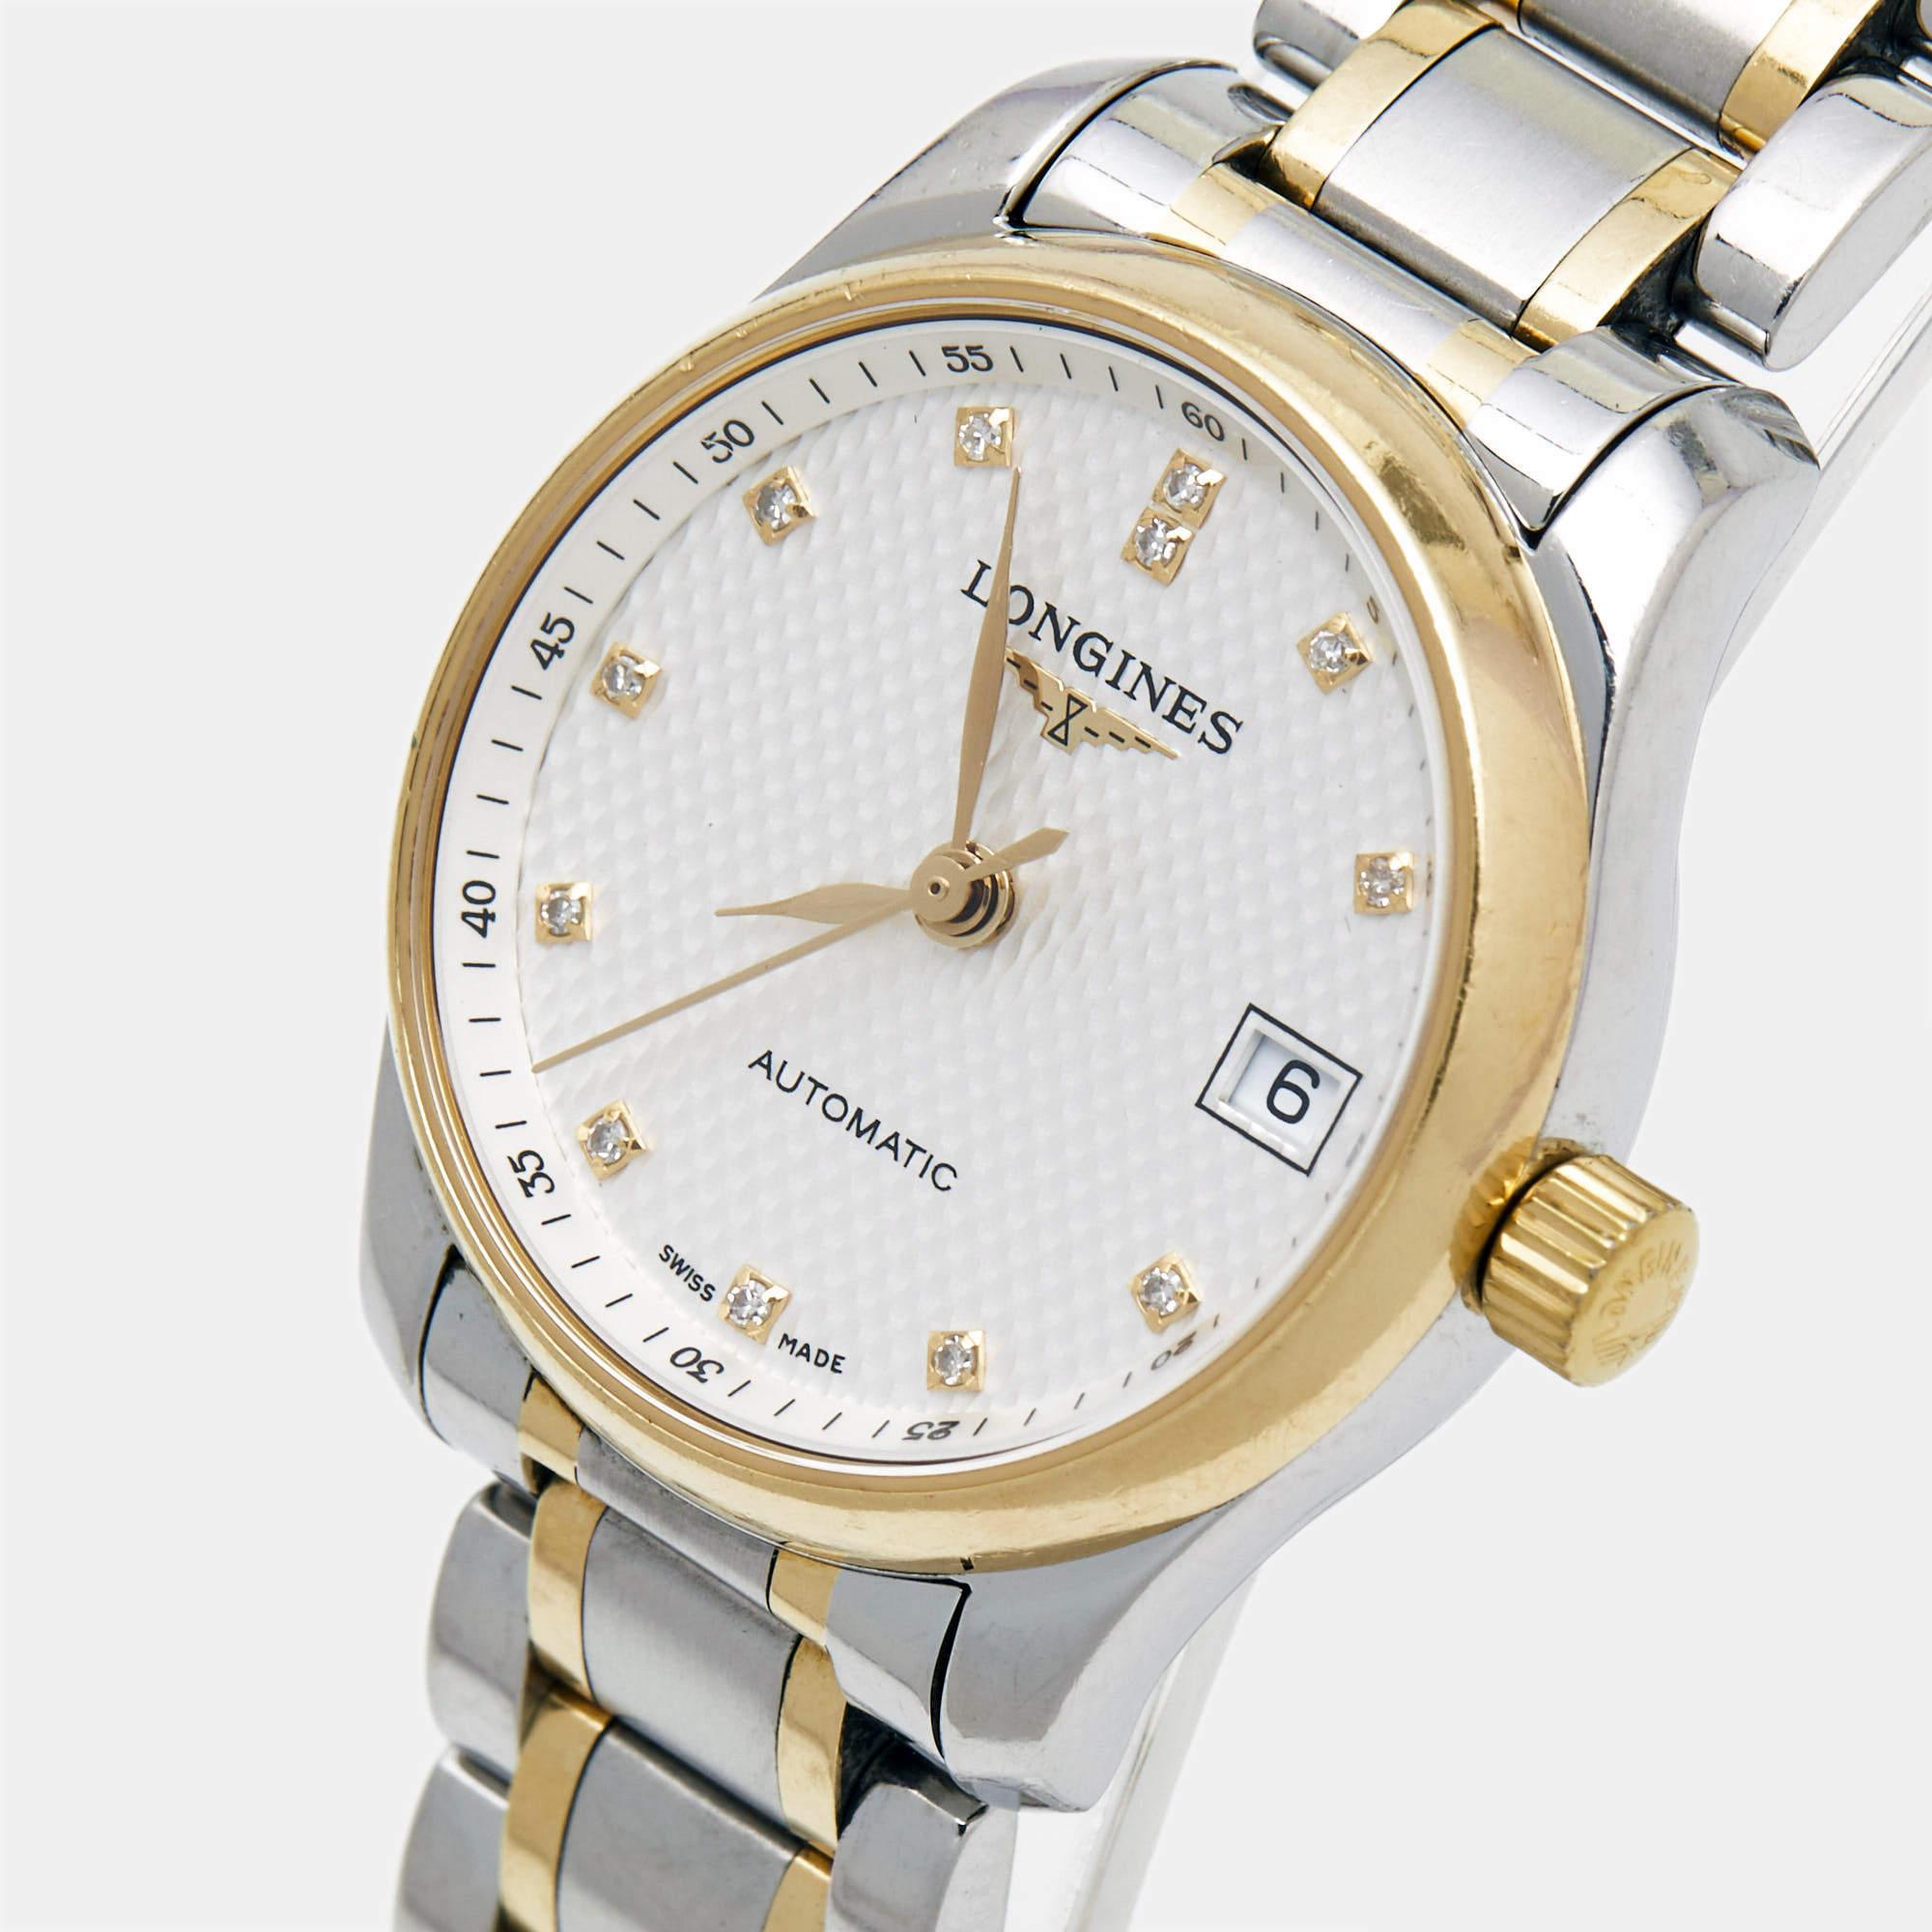 A timeless silhouette made of high-quality materials and packed with precision and luxury makes this wristwatch the perfect choice for a sophisticated finish to any look. It is a grand creation to elevate the everyday experience.

Includes
Original